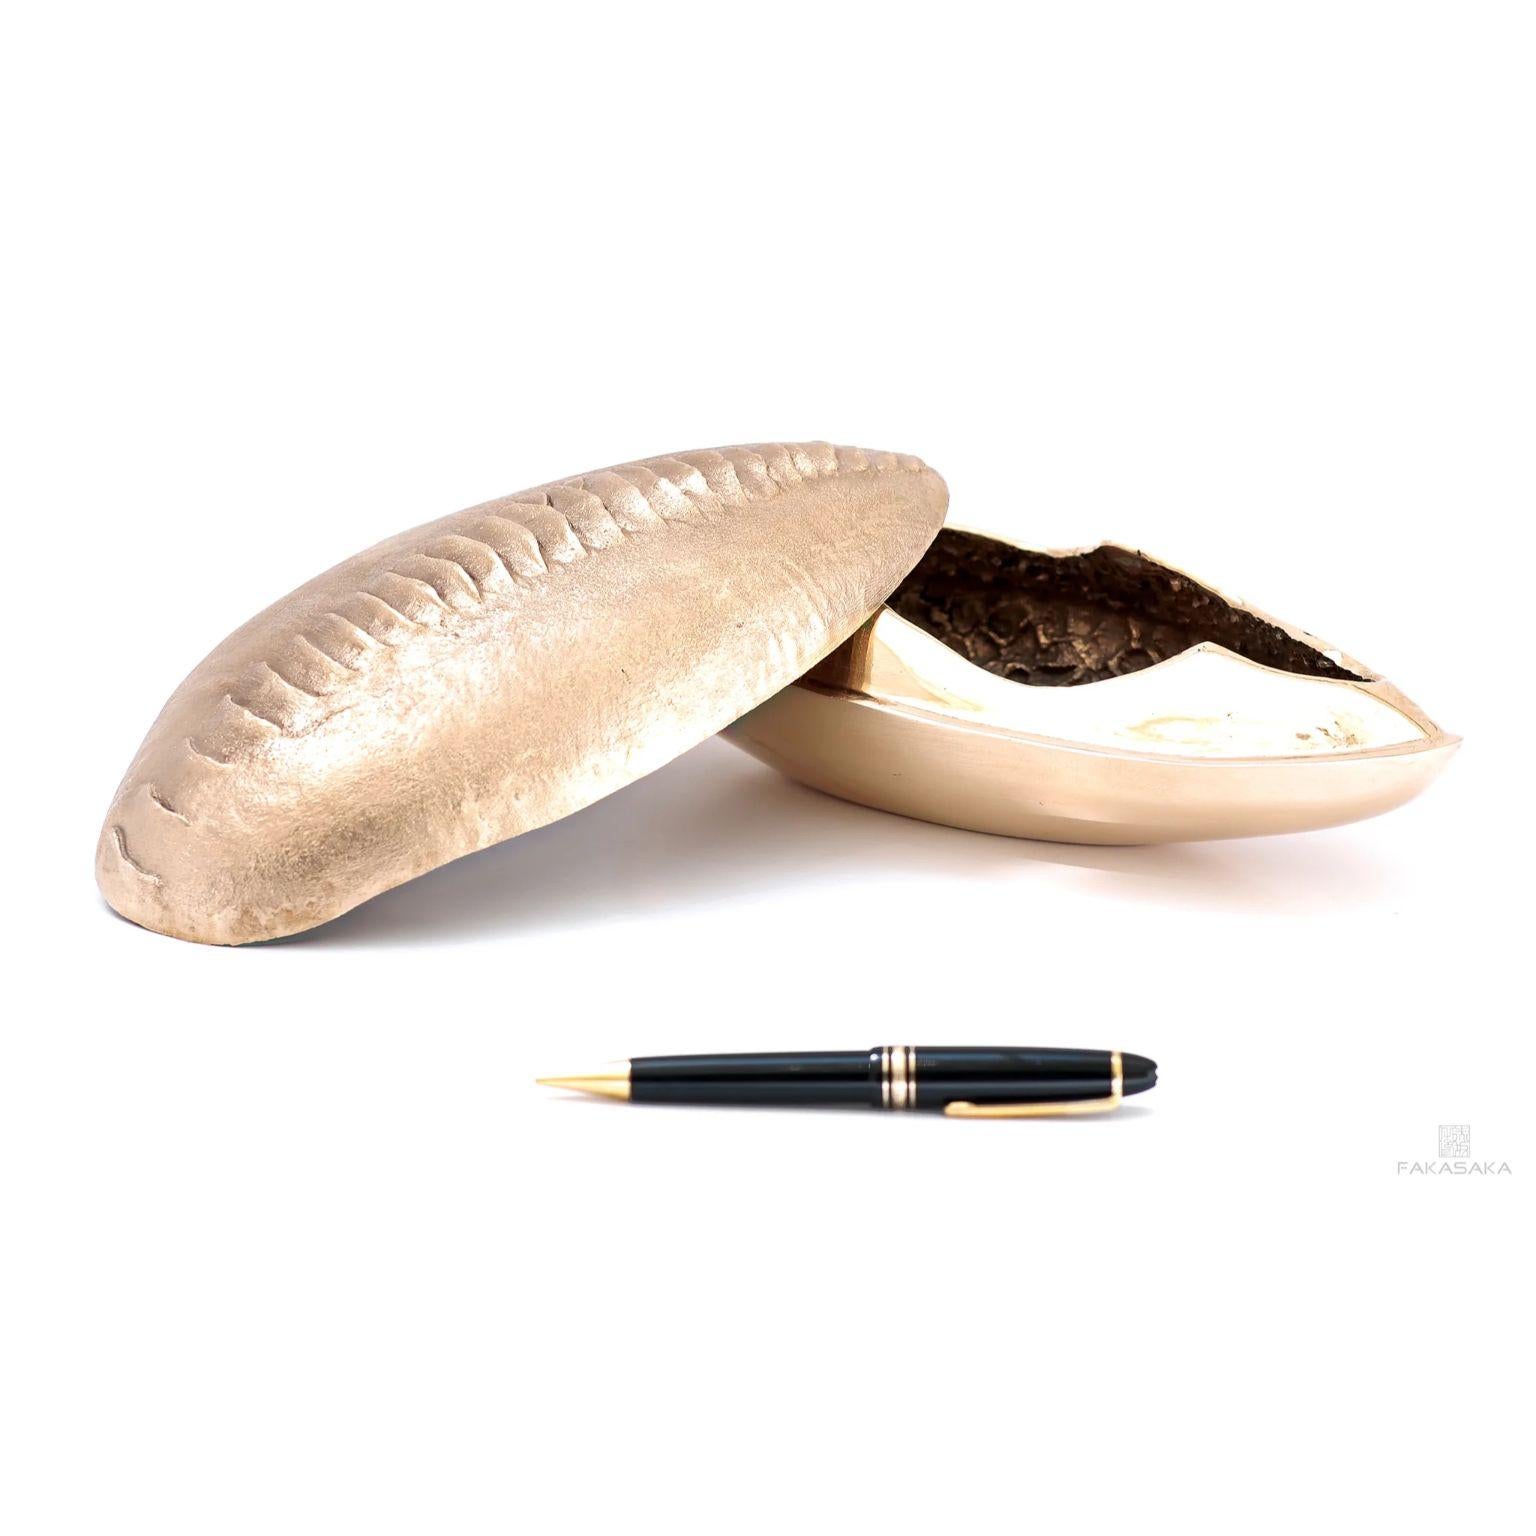 Contemporary Pearl Box by Fakasaka Design For Sale